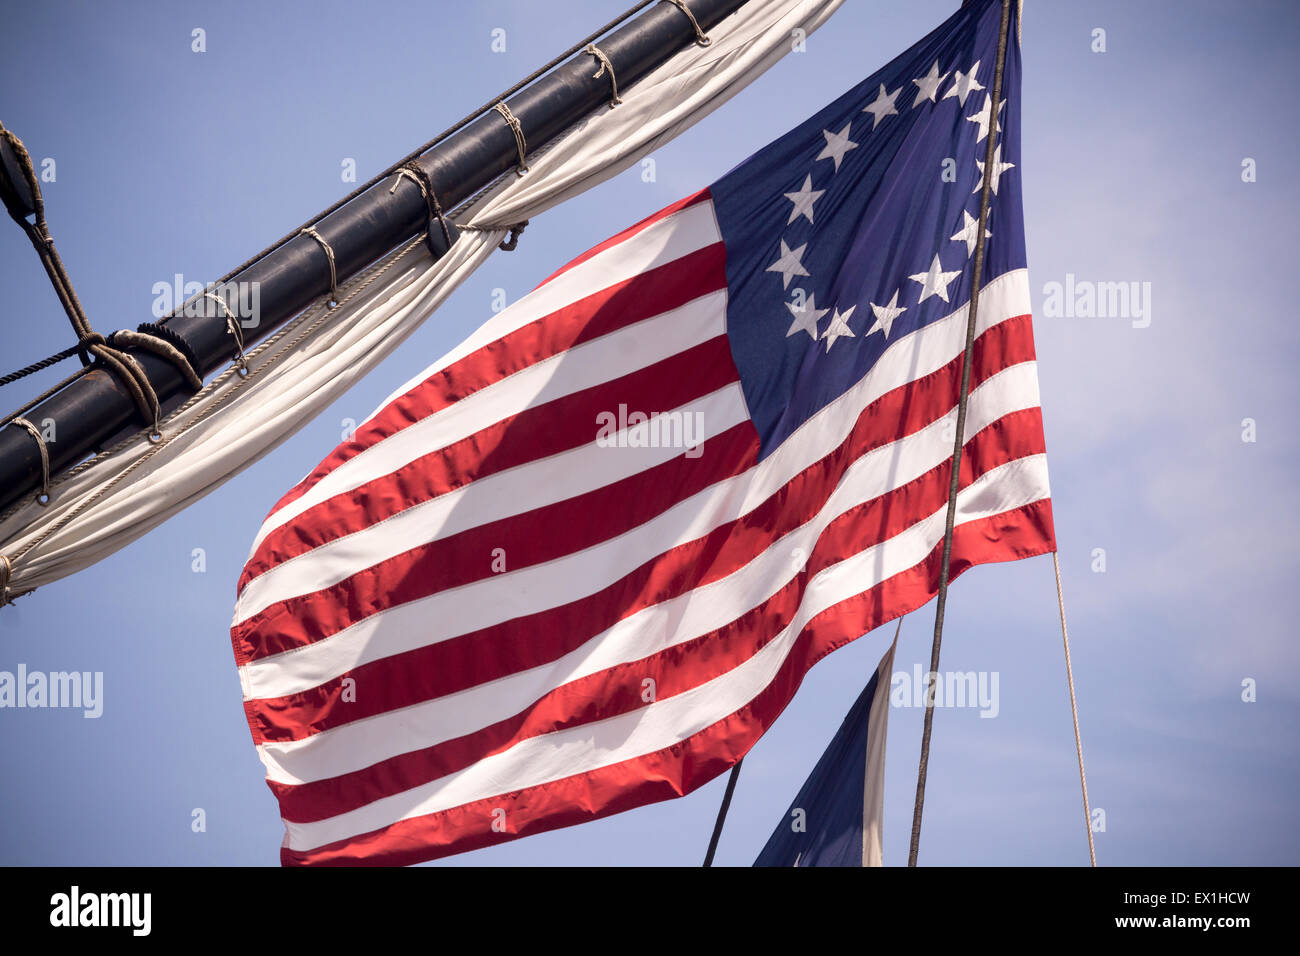 The American flag with thirteen stars representing the thirteen colonies flies from the French frigate L'Hermione berthed on the East River in New York on Friday, July 3, 2015. Hermoine is a replica of the 18th century frigate that brought French General the marquis of Lafayette to America to assist in the war of independence from Britain. It will take part in the July 4th festivities and continue its travels up the East Coast and onto Canada. (© Richard B. Levine) Stock Photo